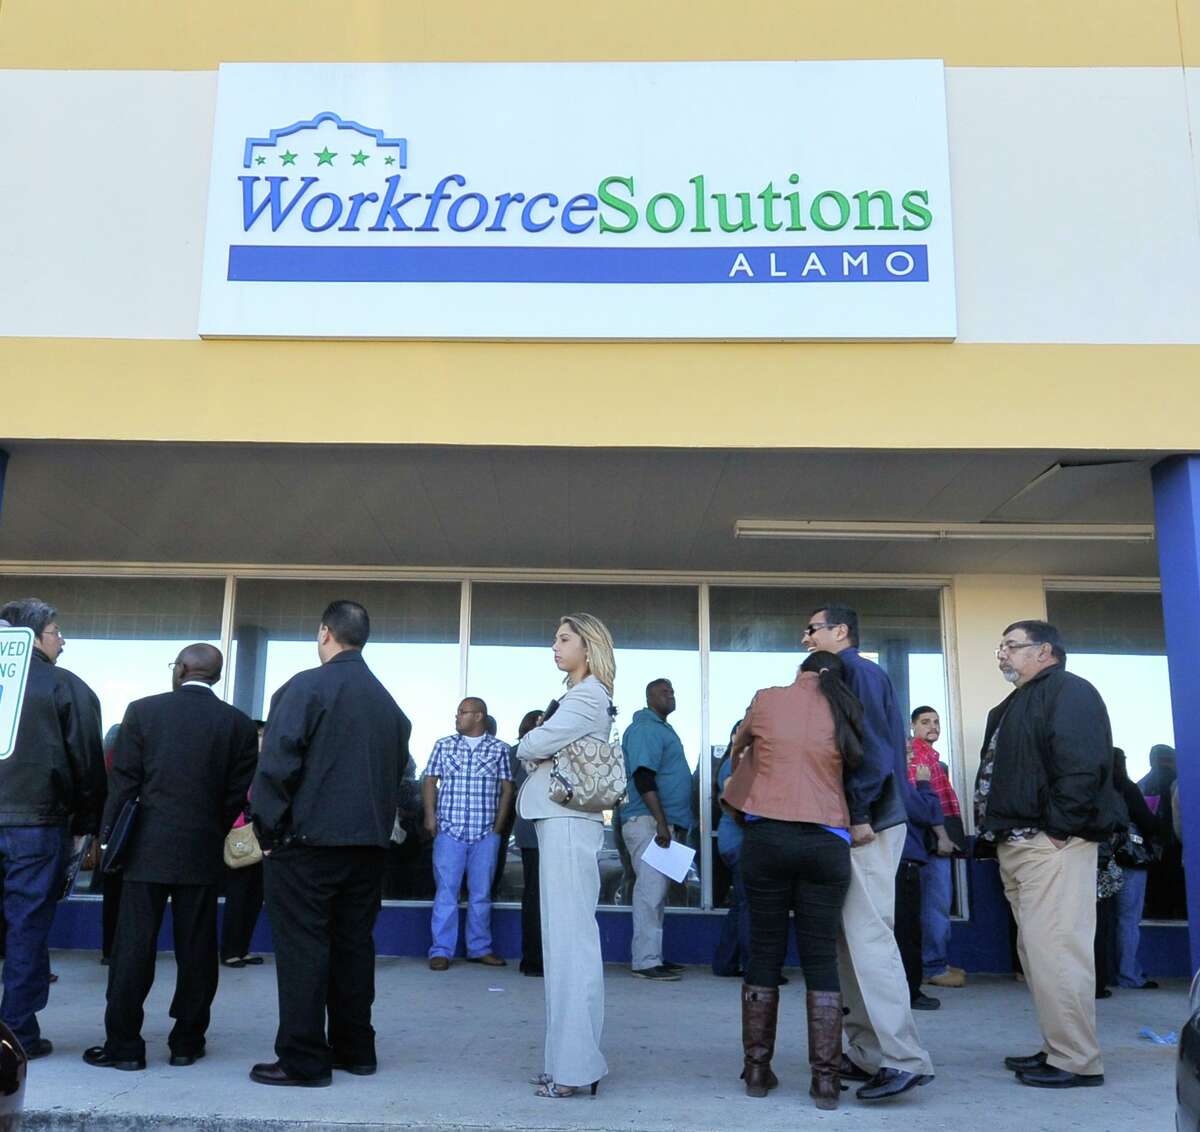 Job seekers wait in line to attend the Workforce Solutions Alamo job fair in 2014.